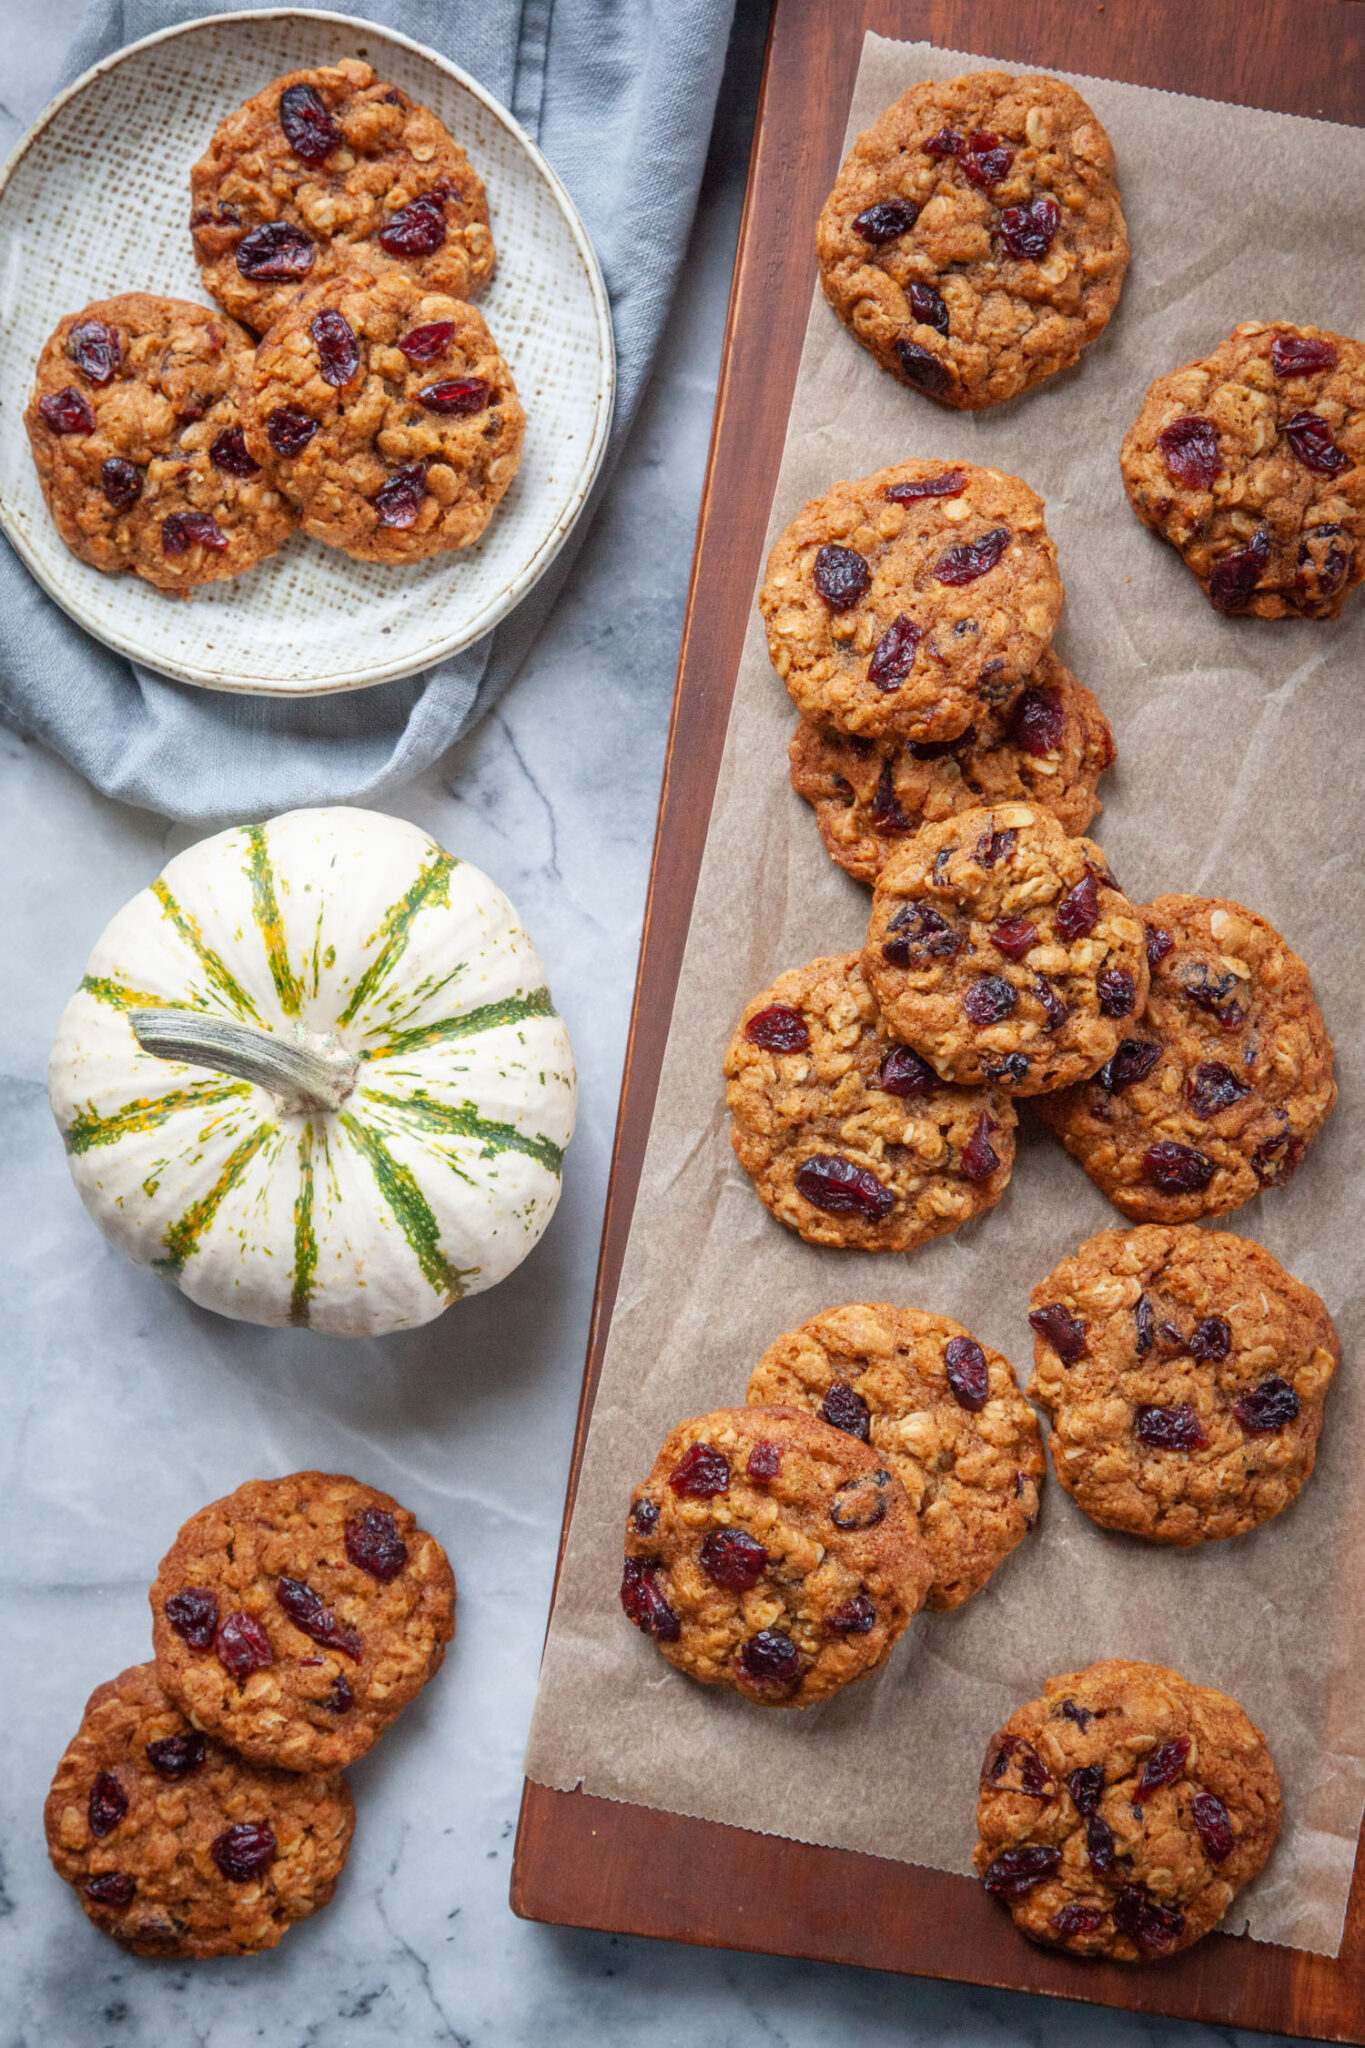 Pumpkin oatmeal cranberry cookies on a wooden cutting board, with more cookies on a plate and on the table. A small decorative pumpkin is next to the cutting board.